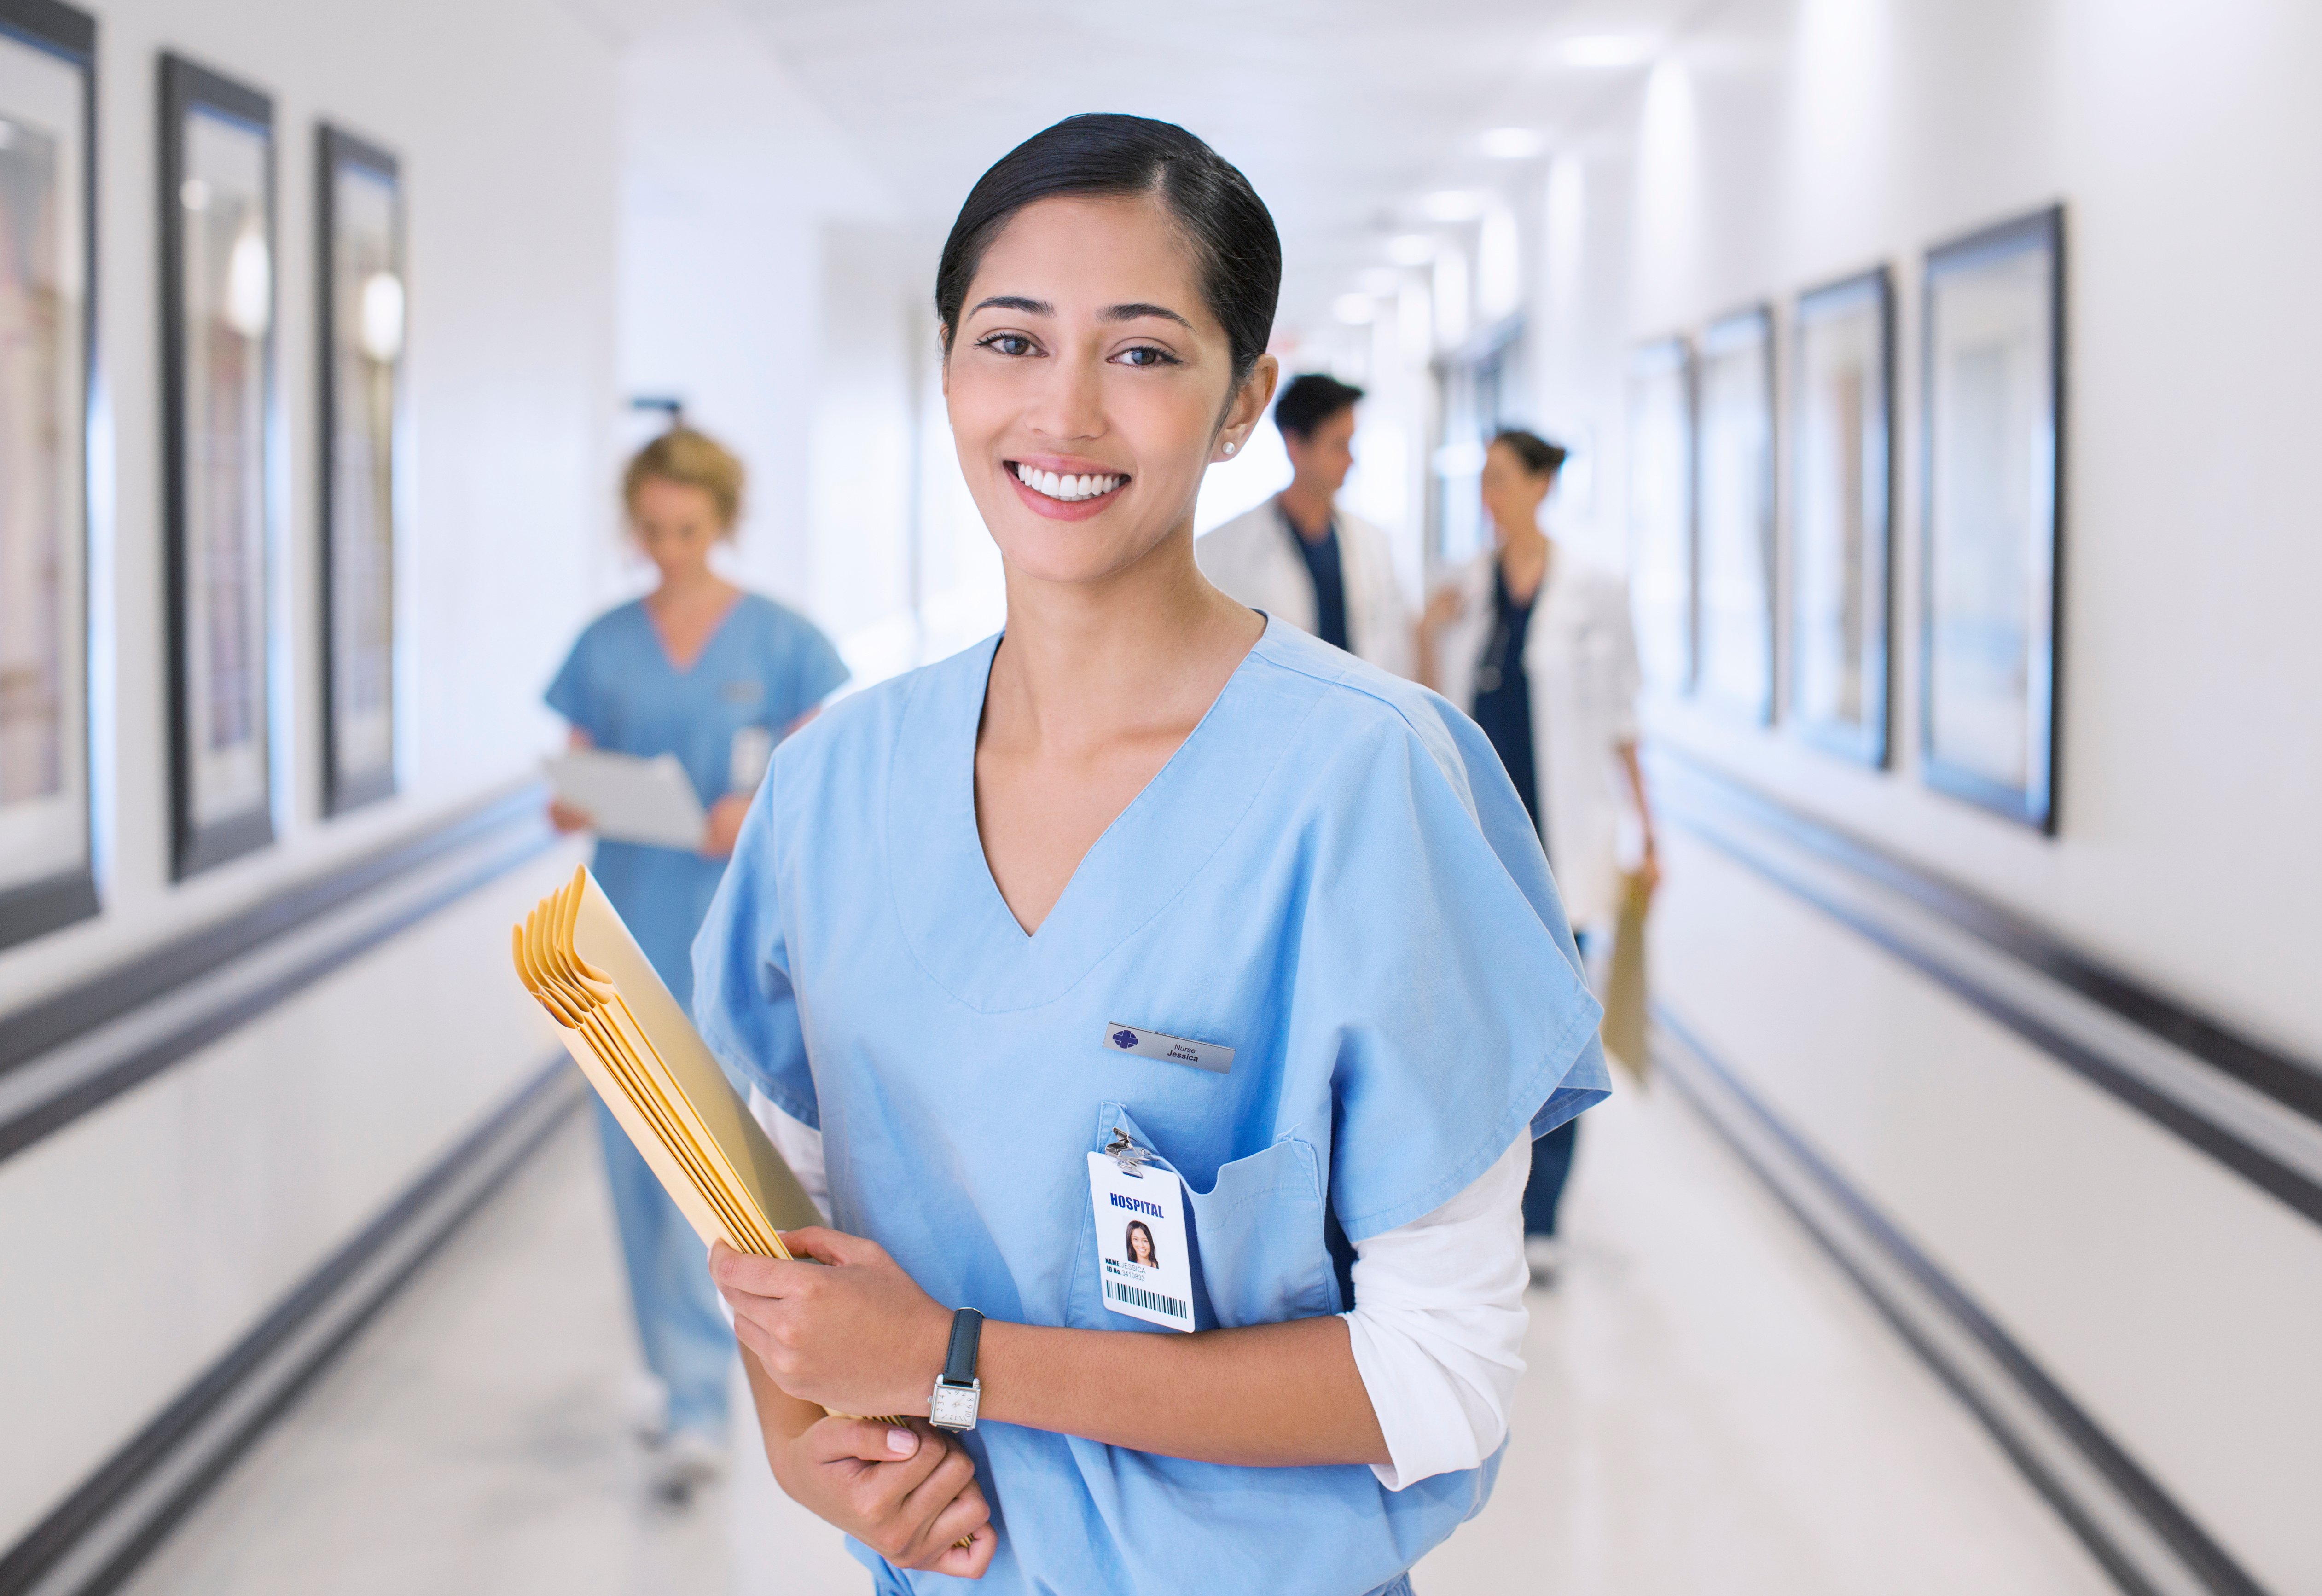 Nurse standing in a hallway holding files